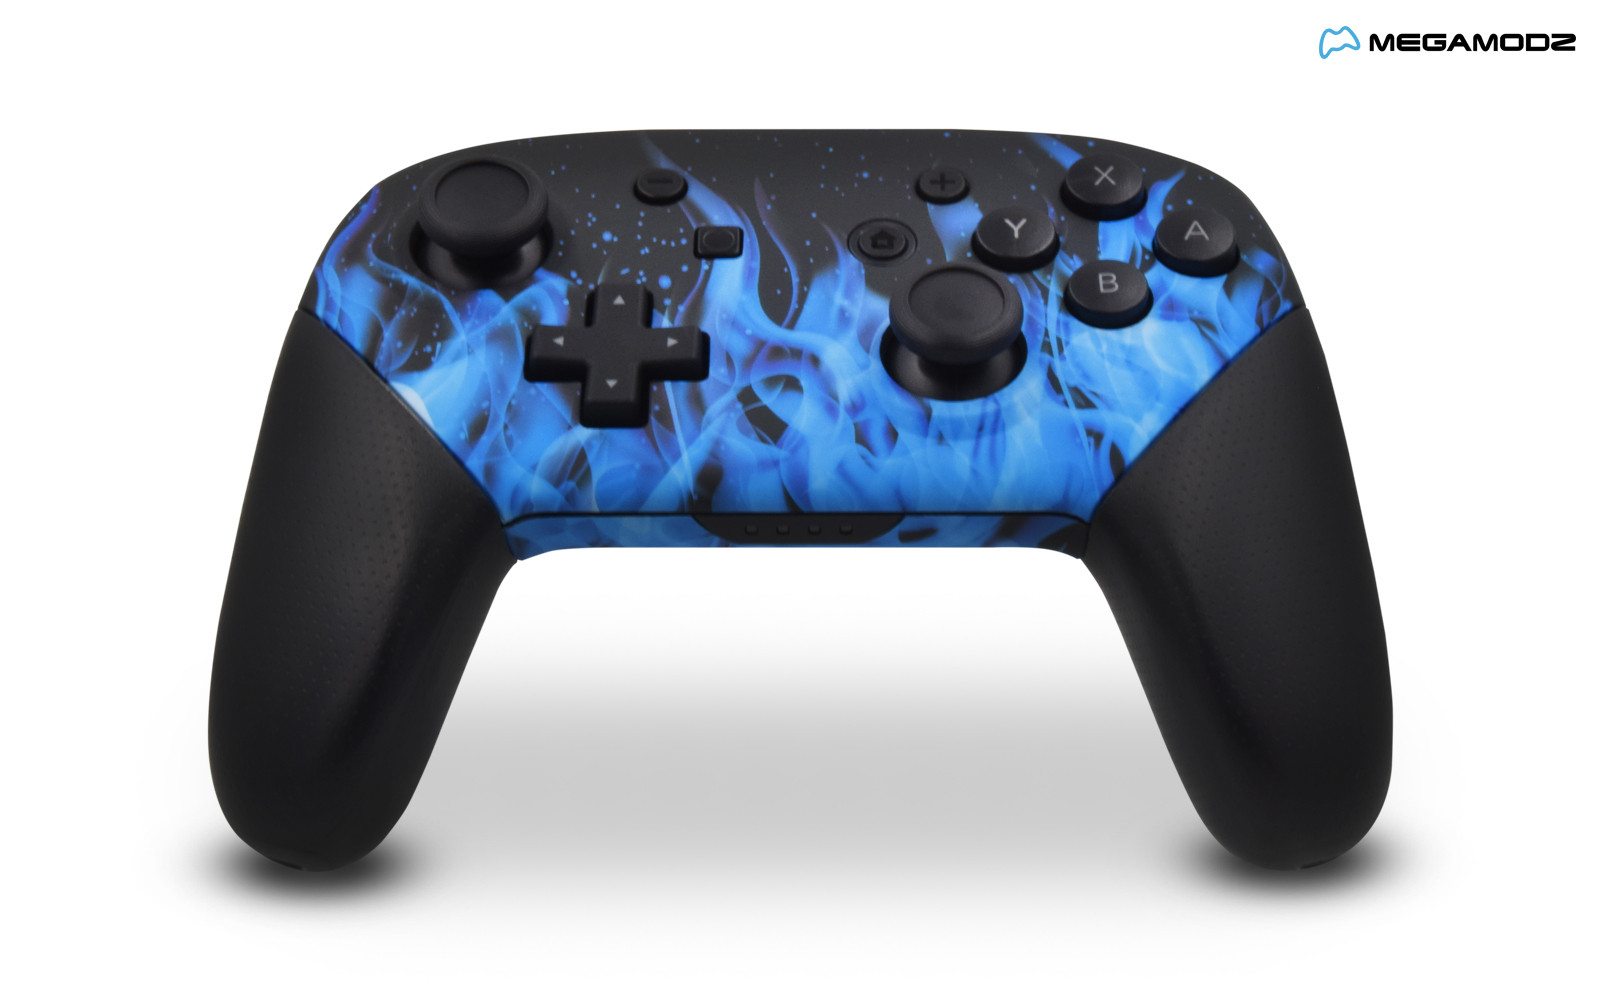 blue switch pro controller